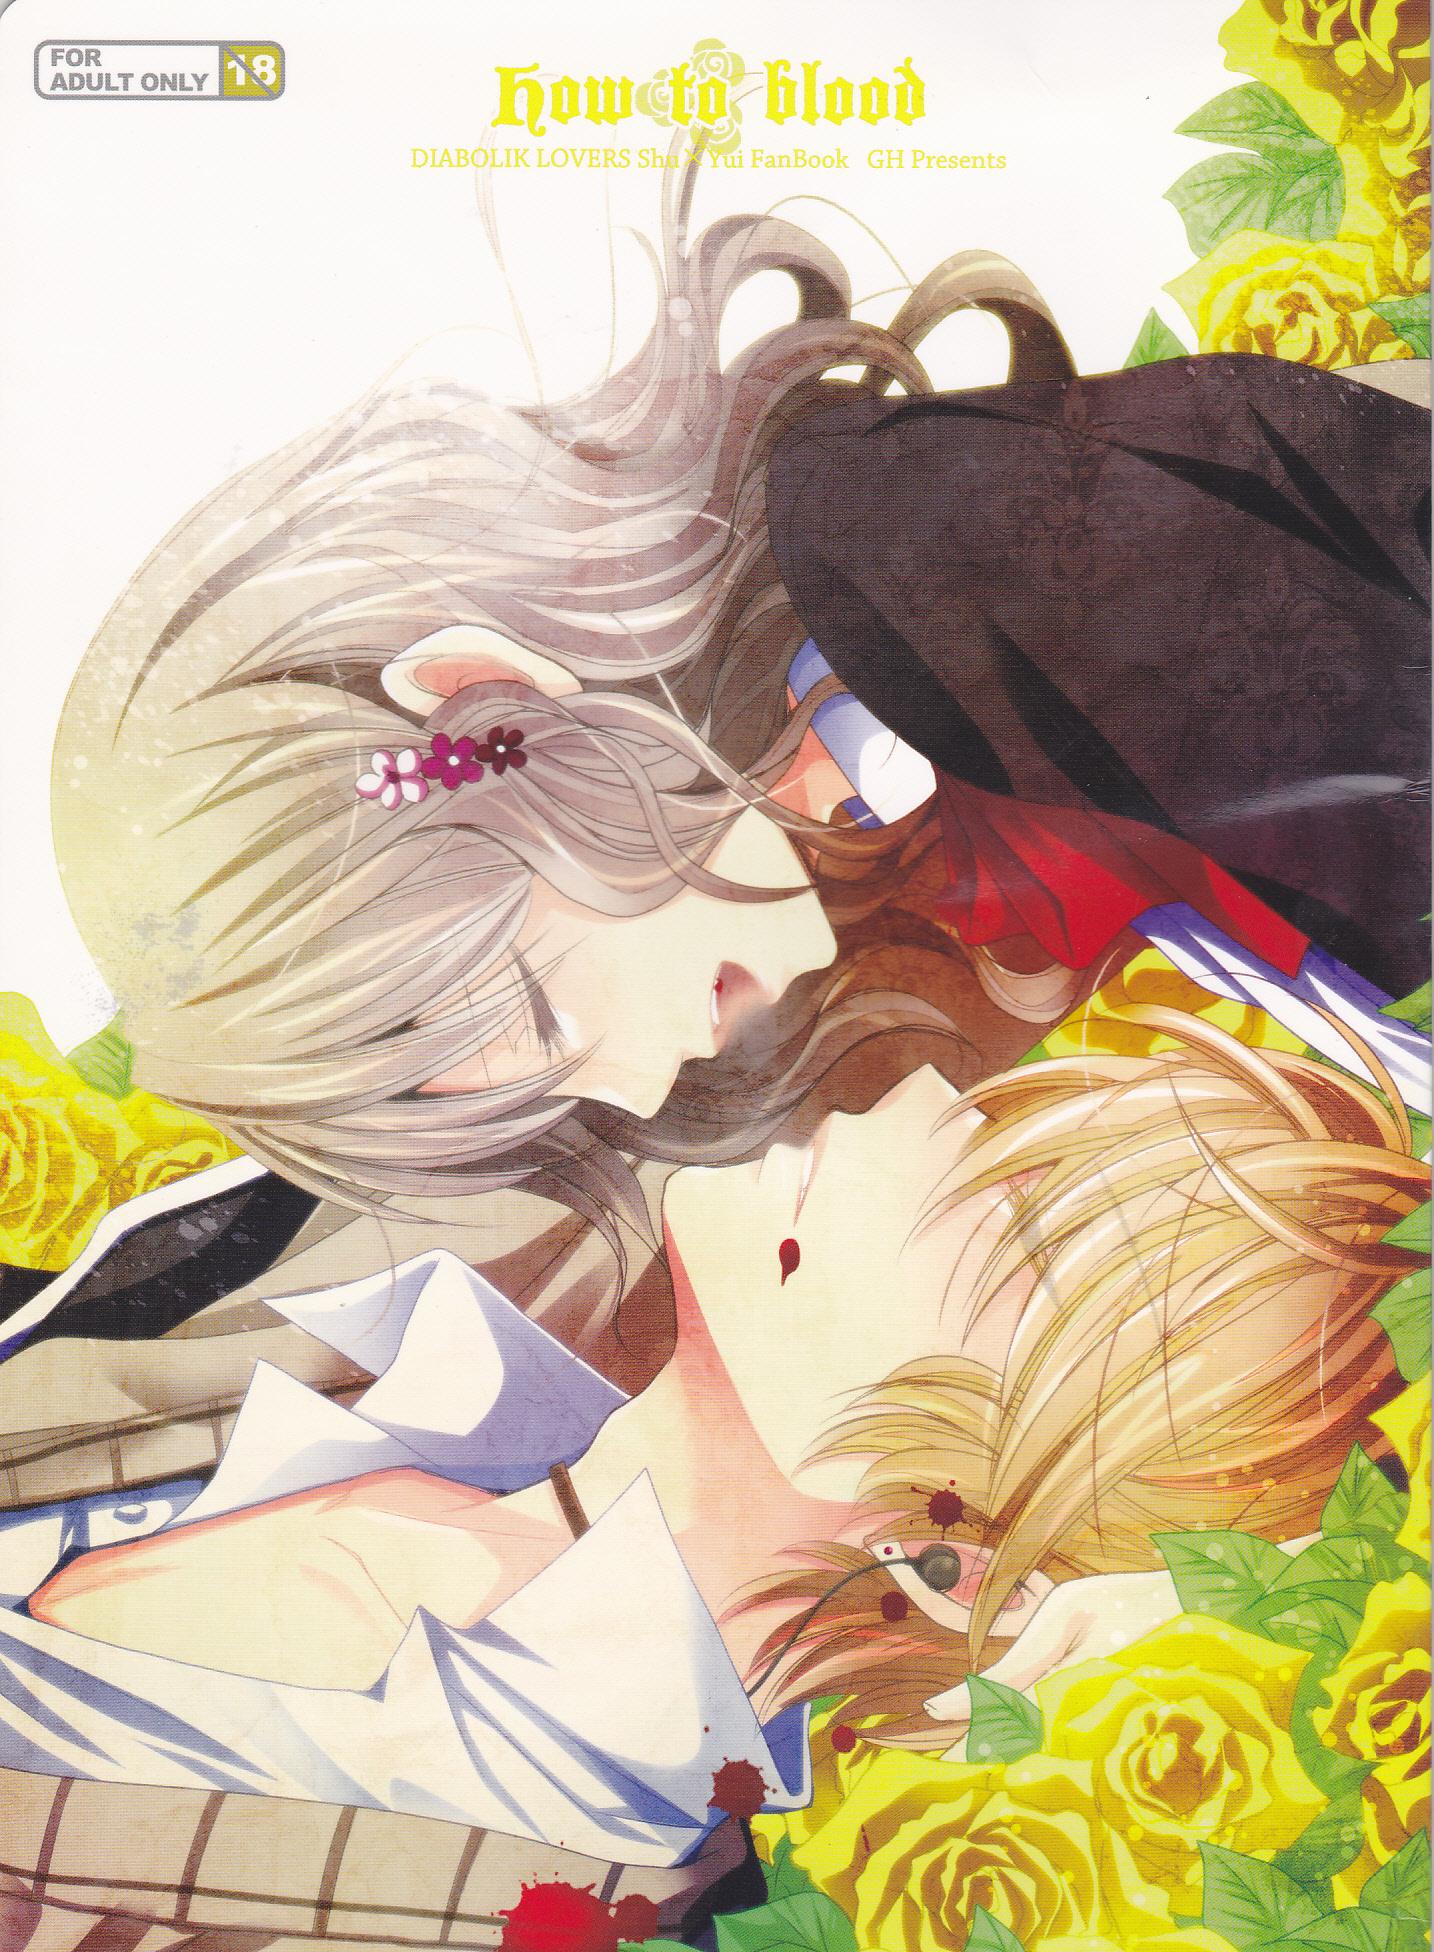 African How to Blood - Diabolik lovers Peruana - Picture 1